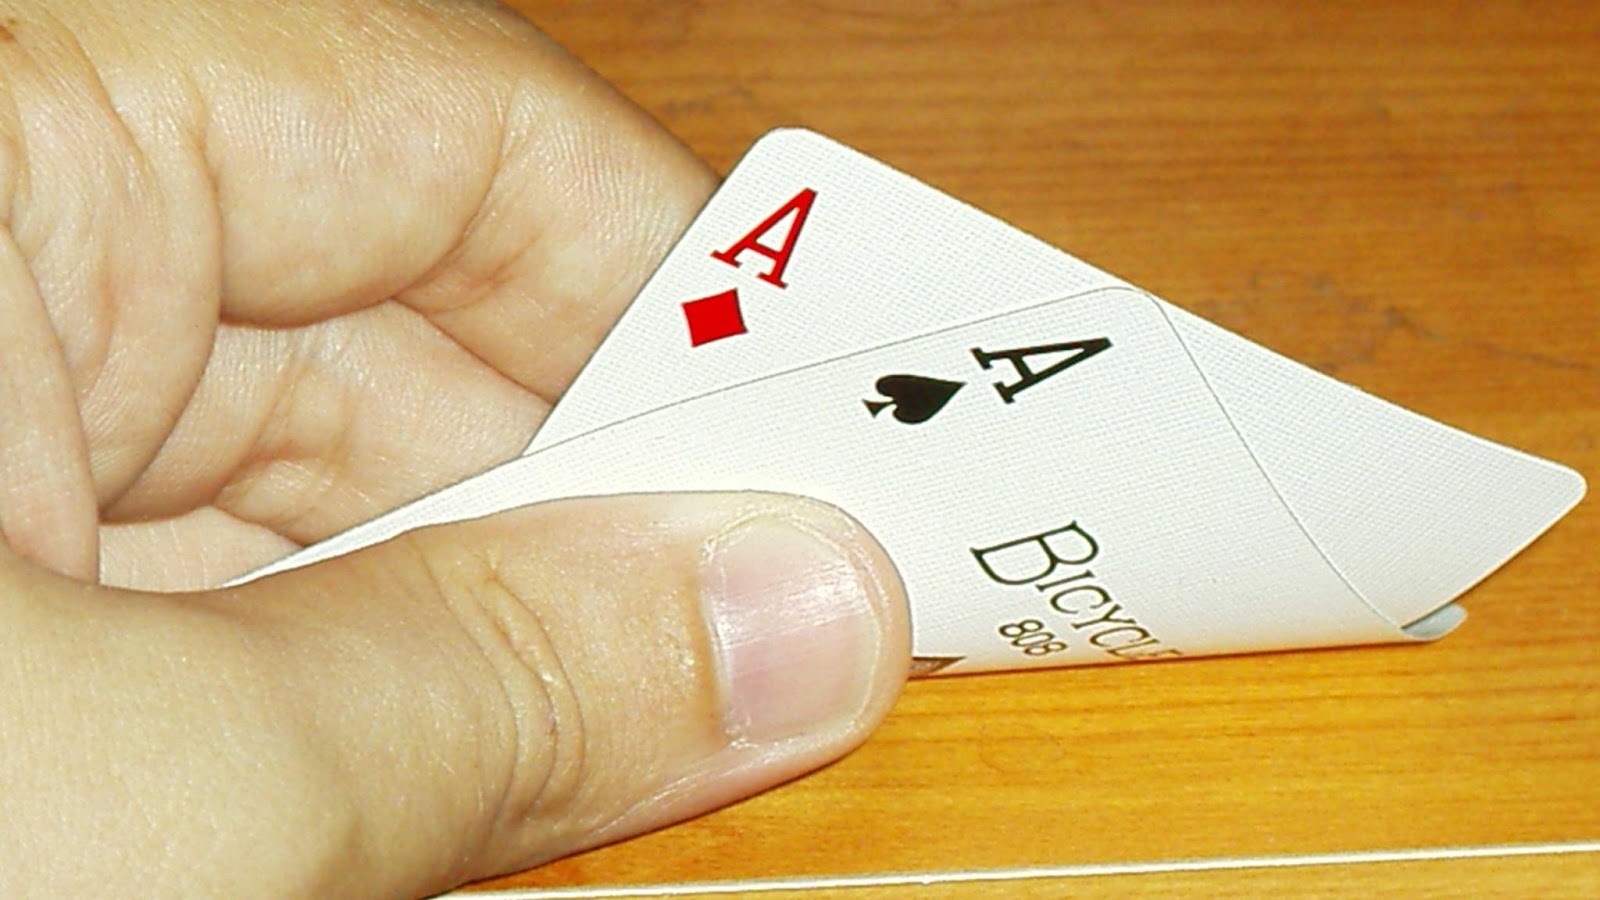 Tips on Reading Your Opponents' Poker Hands